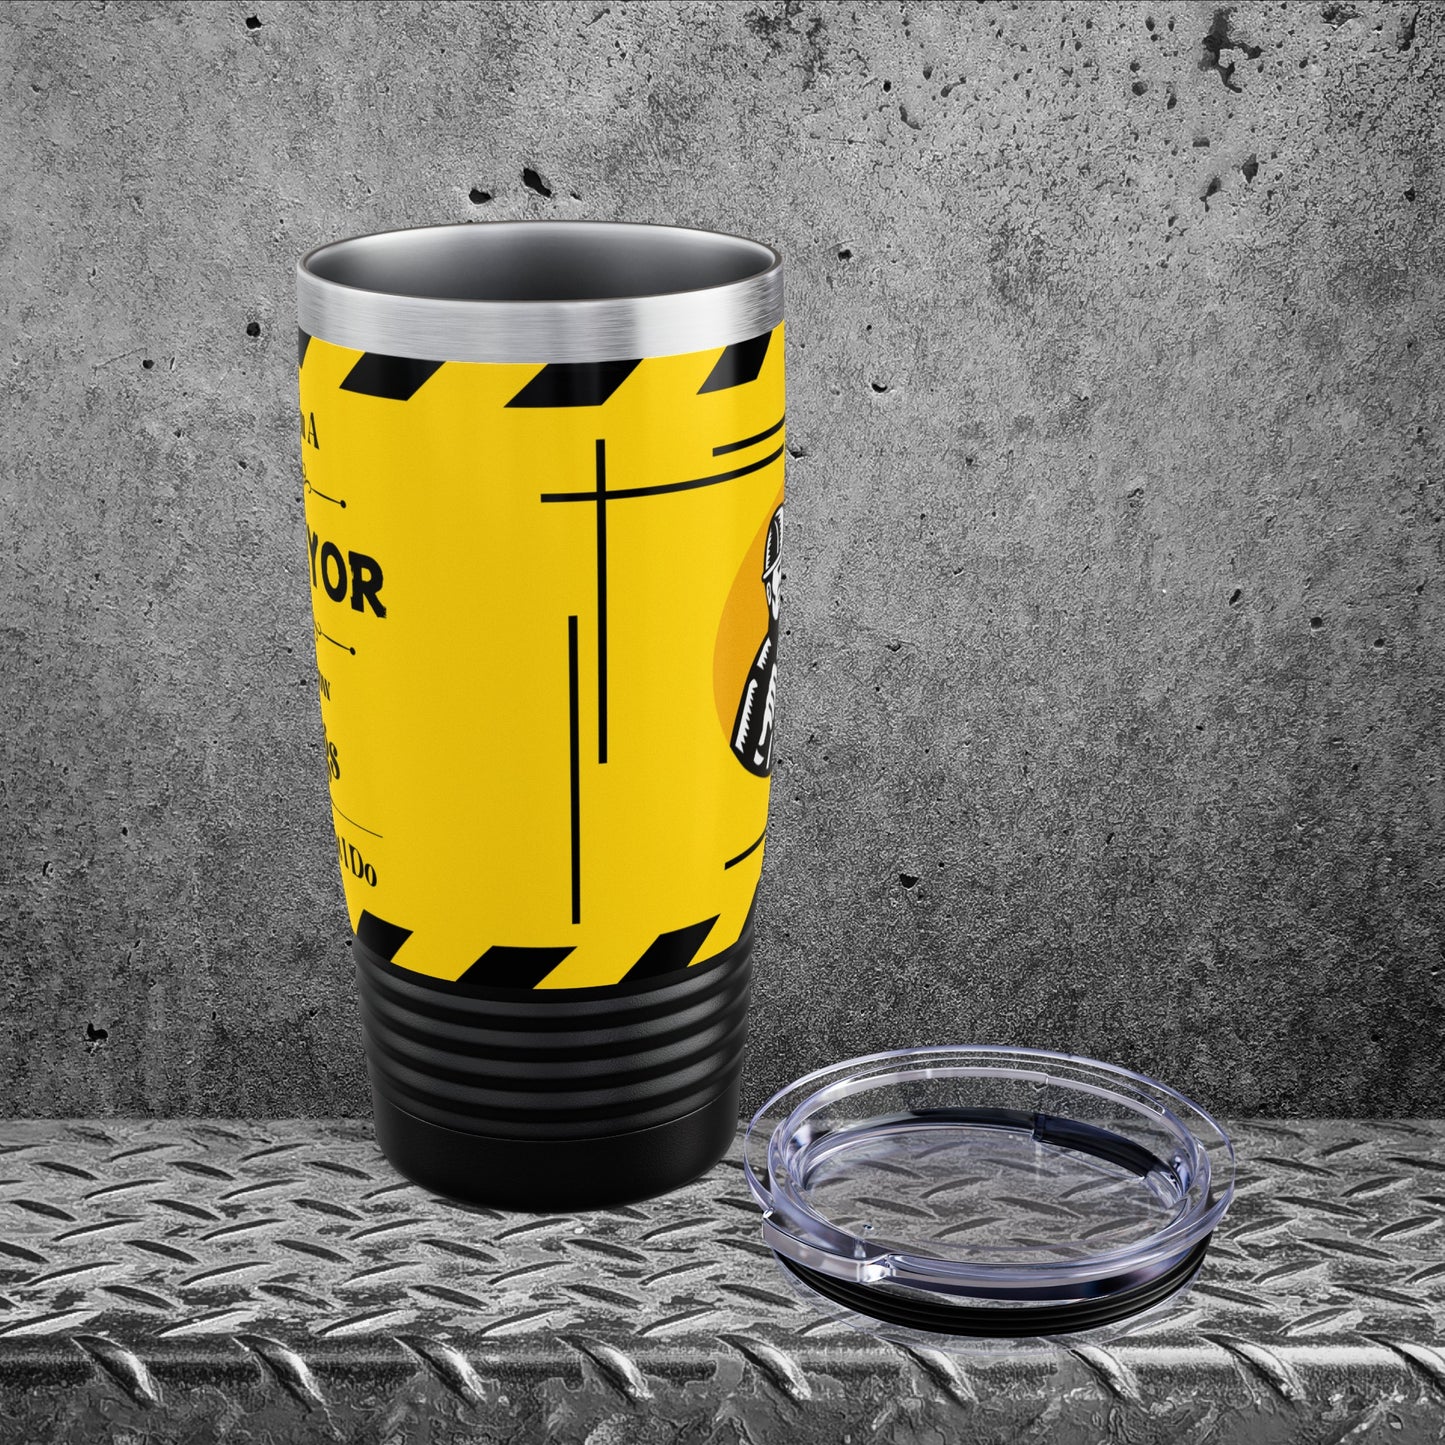 Relax, I'm A Surveyor, And I Know Things - Ringneck Tumbler, 20oz